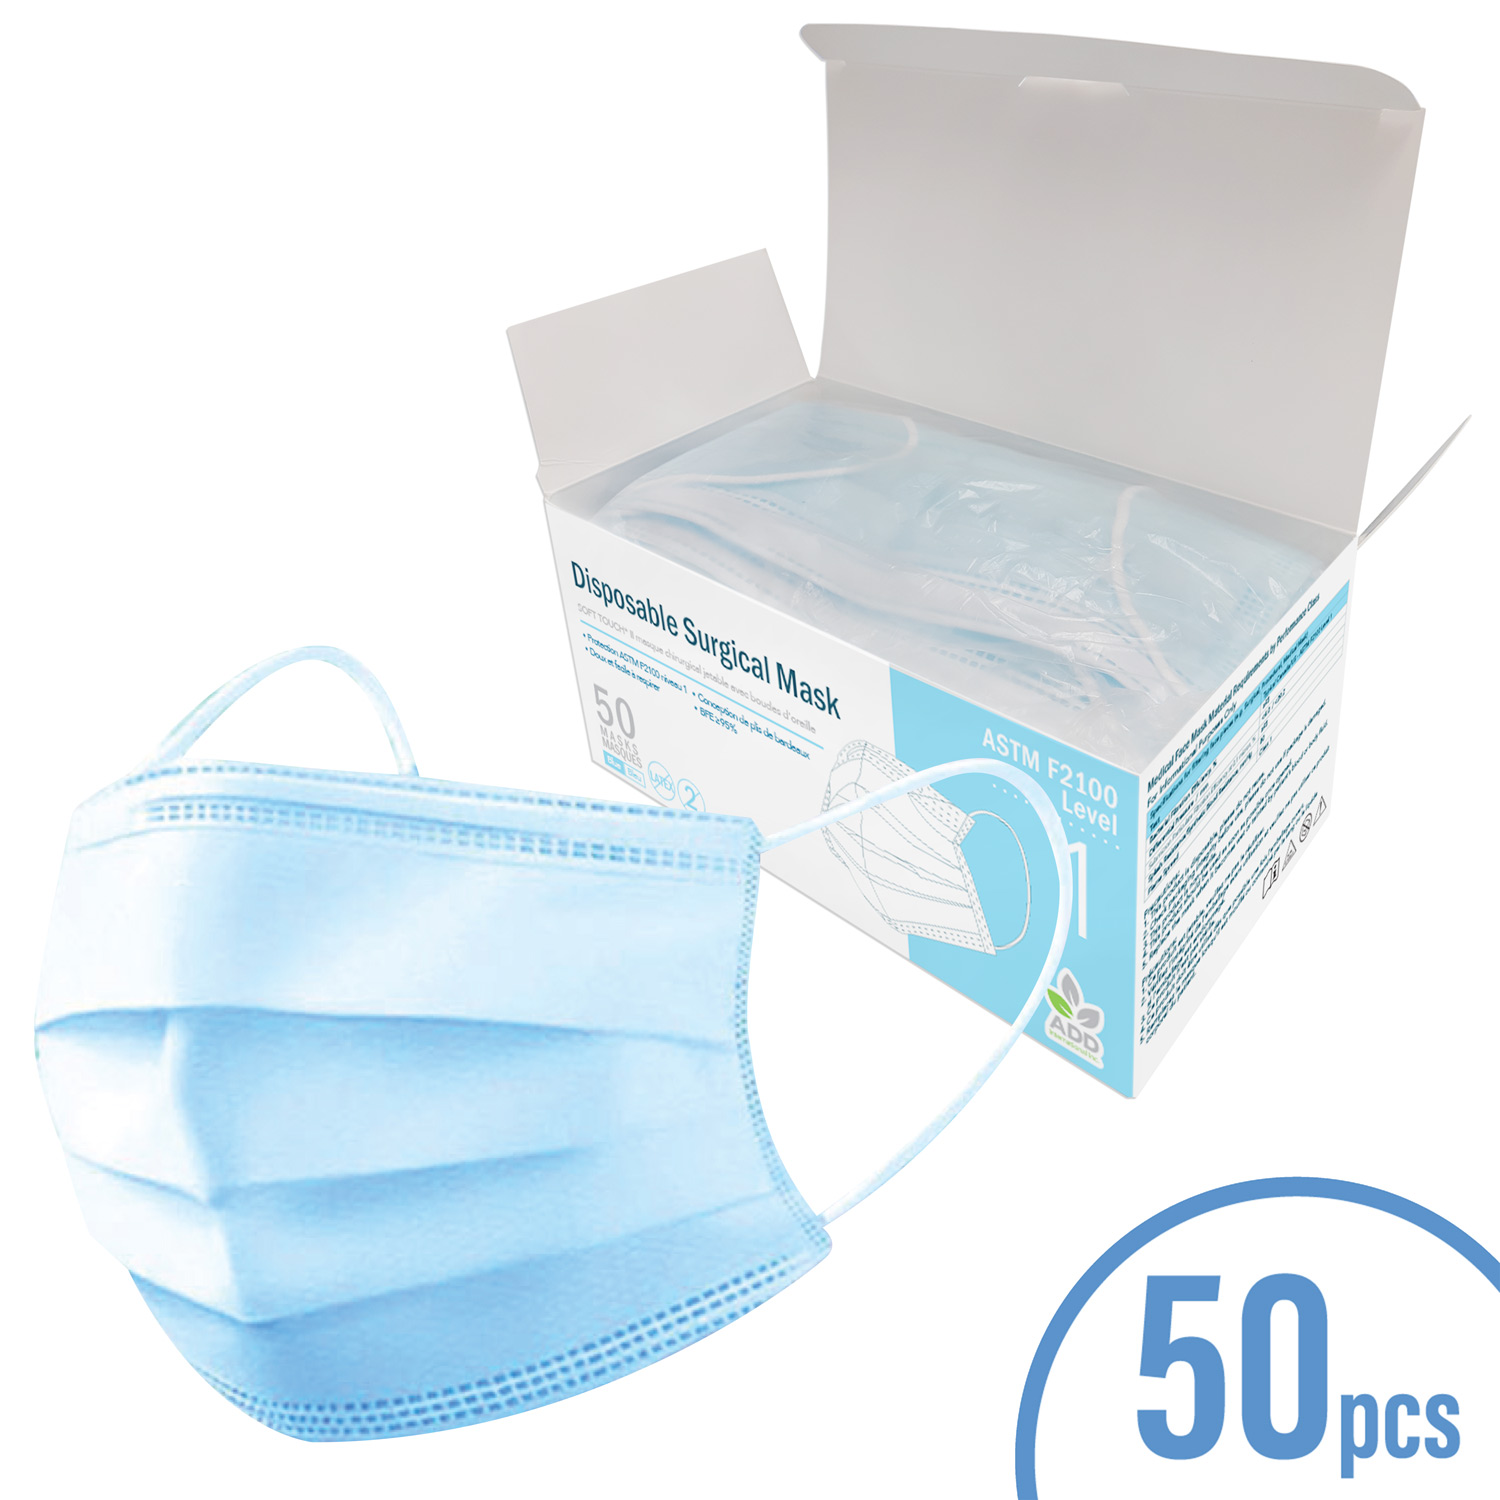 ASTM Level 1 Disposable 3ply Masks